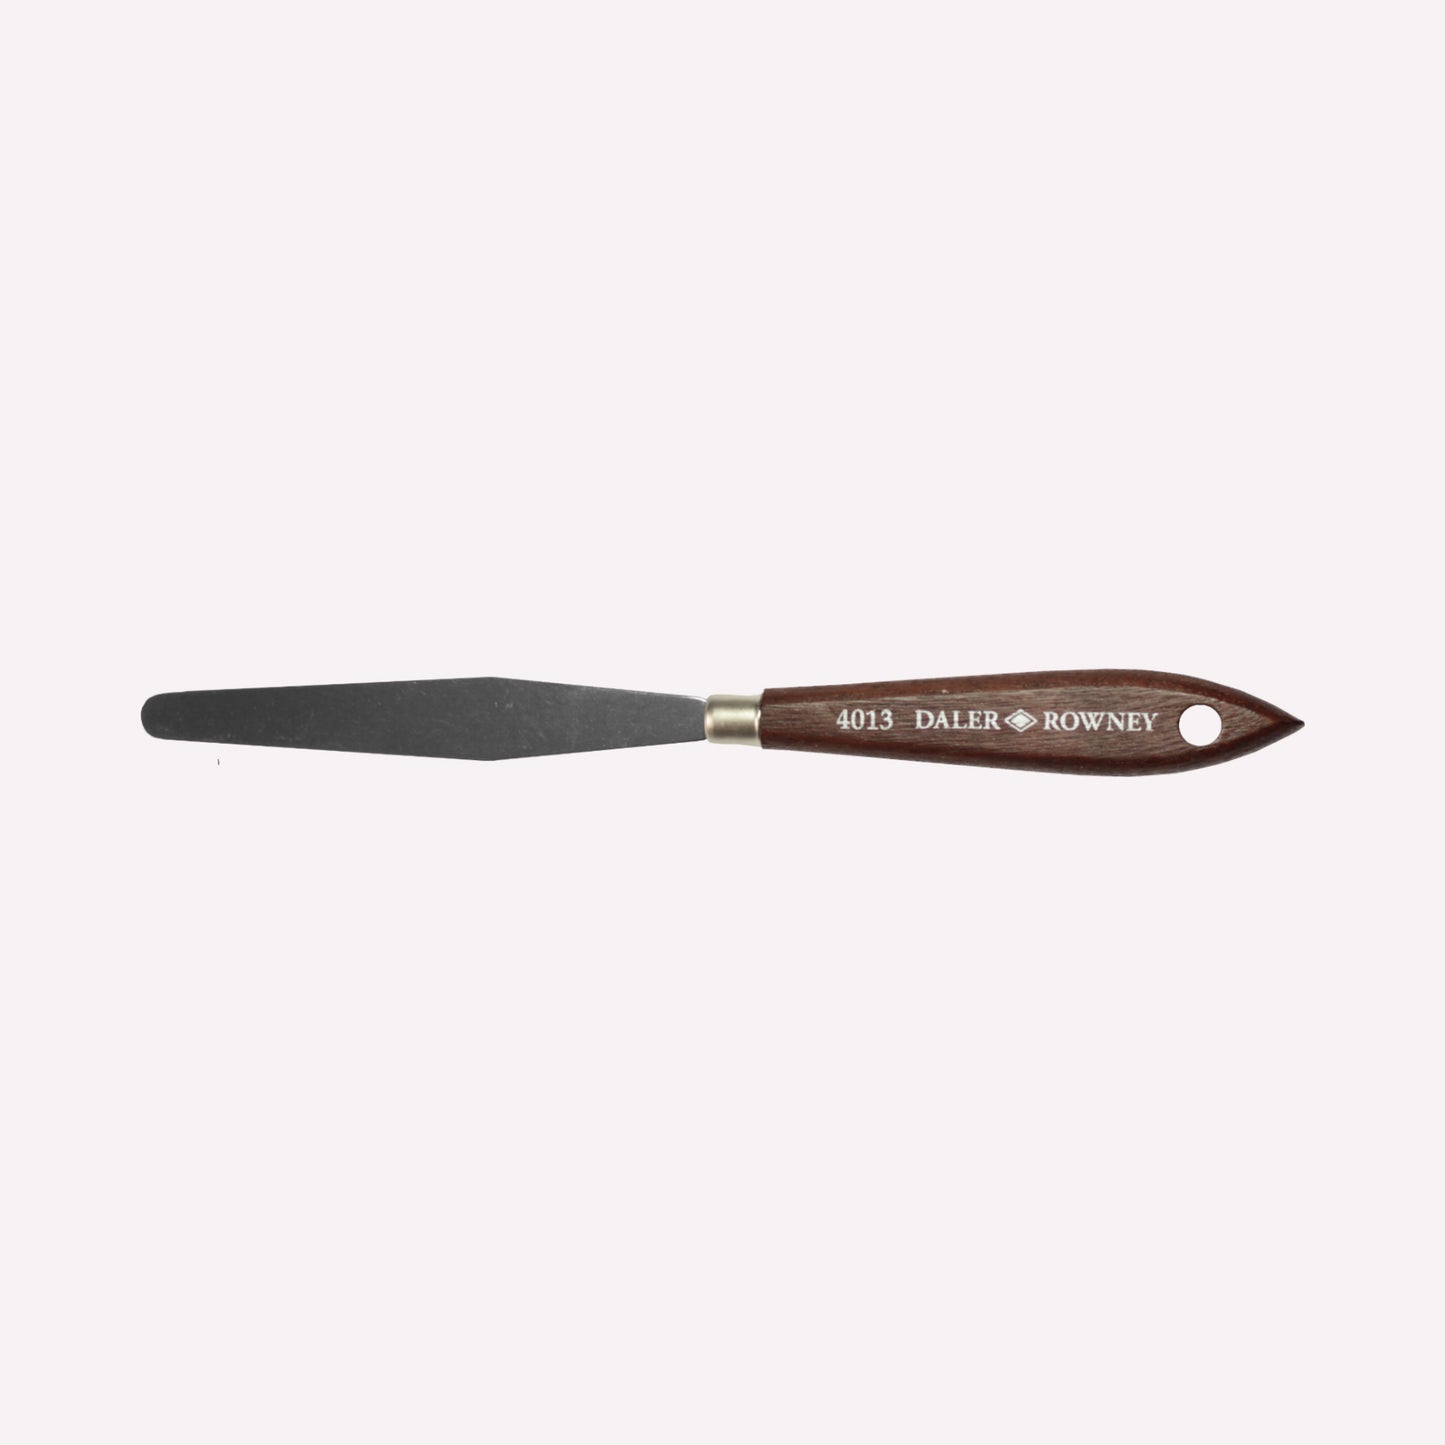 Daler Rowney’s high palette knife in size 4013 with a long, tapered blade, brass ferrule and classy wooden handle. 